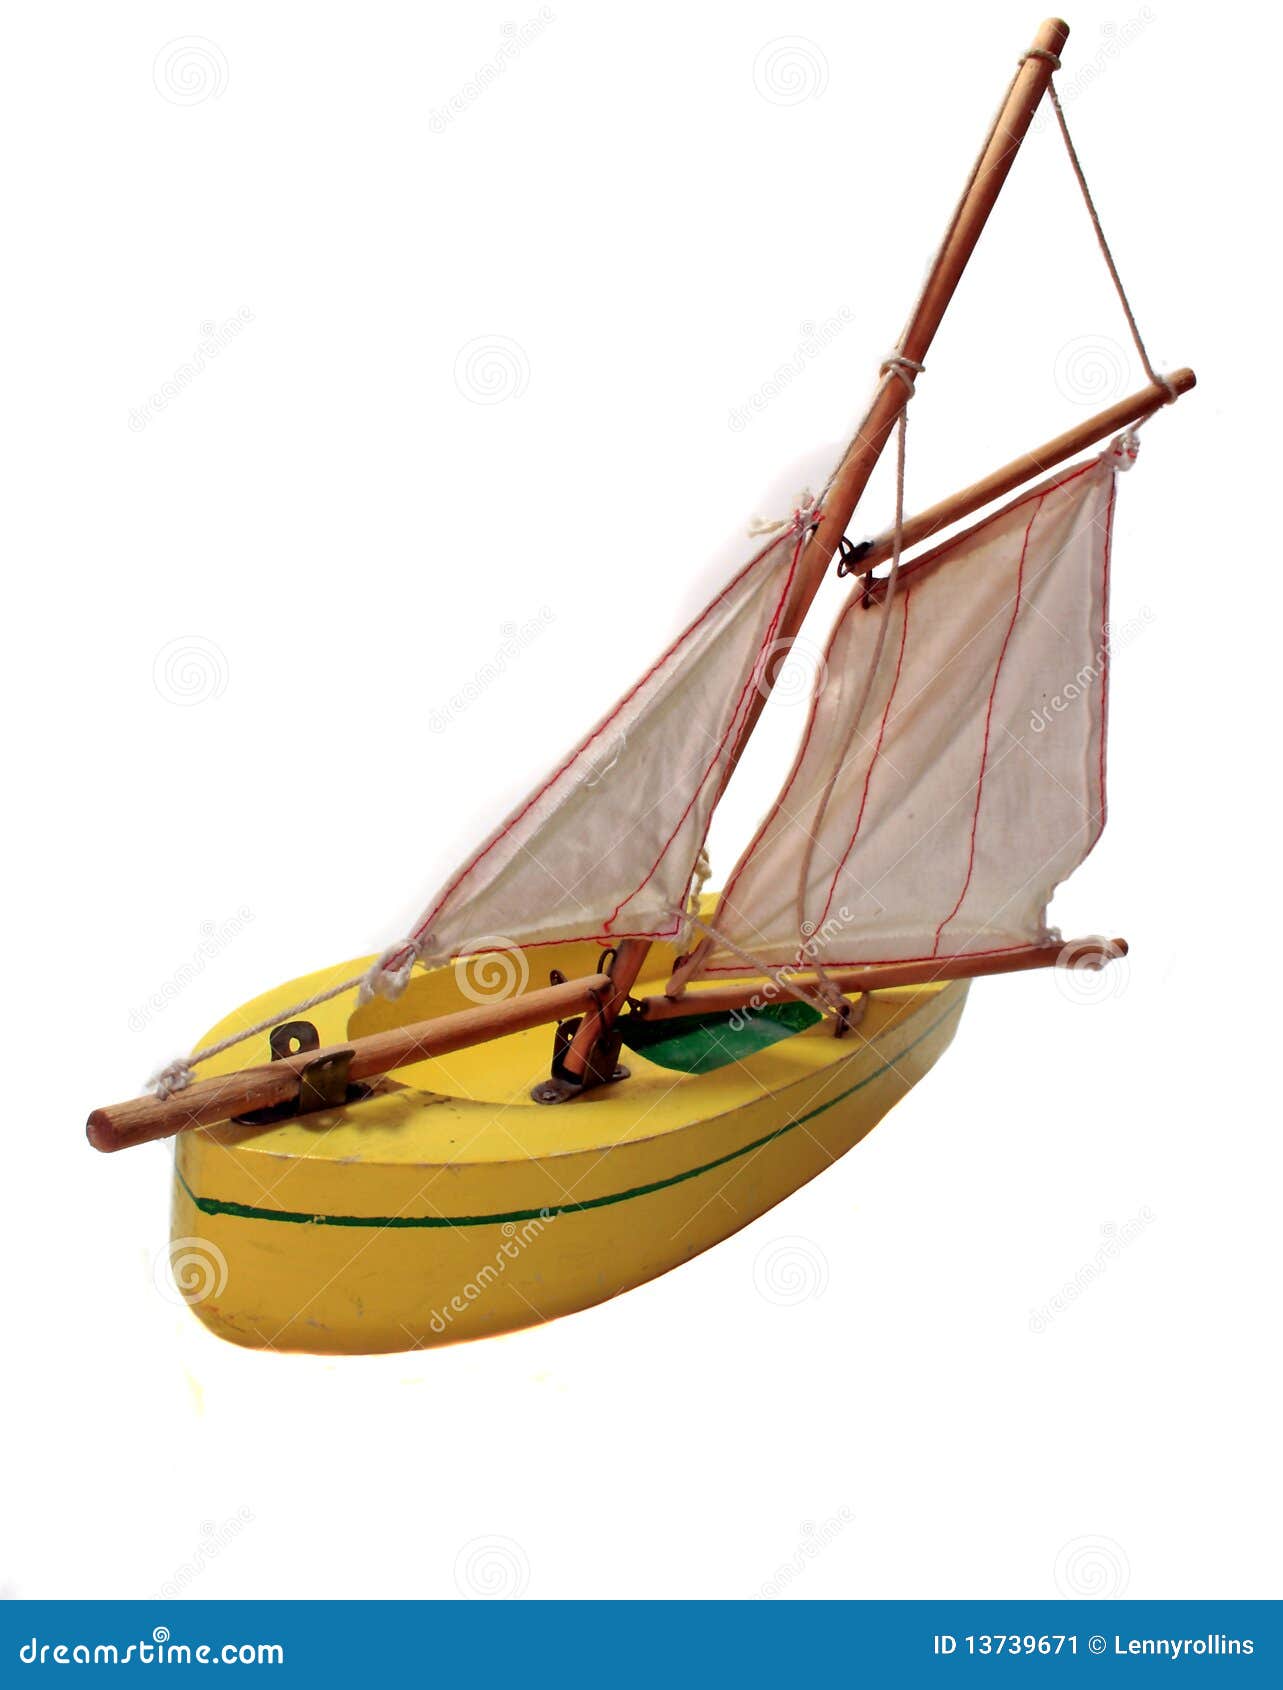 https://thumbs.dreamstime.com/z/yellow-wooden-toy-sailboat-13739671.jpg